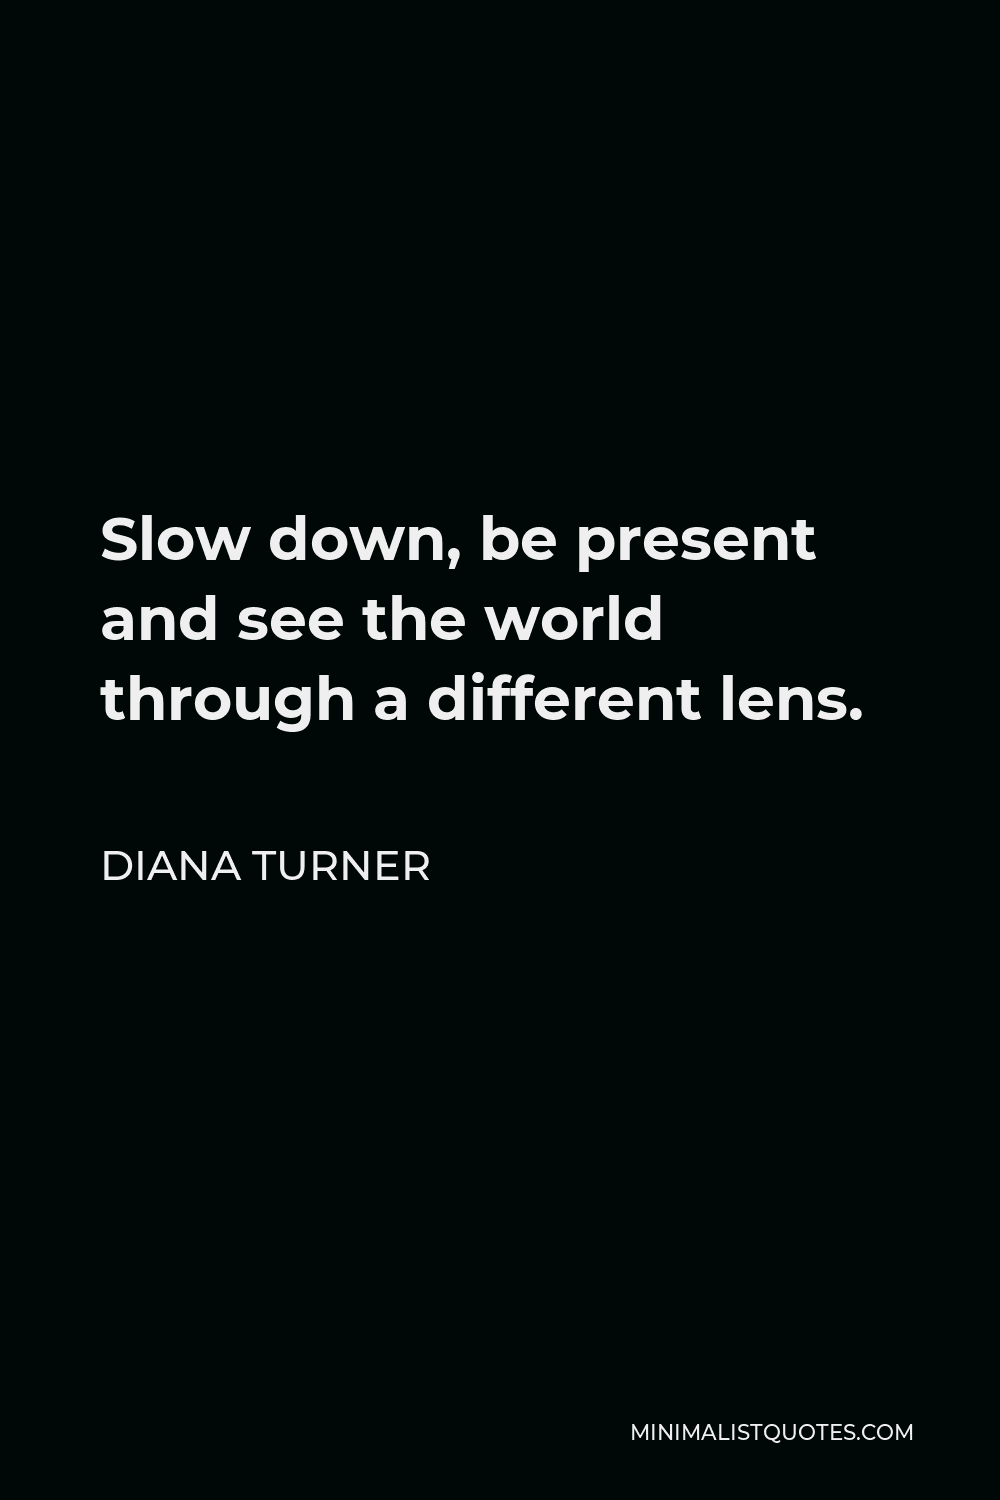 Diana Turner Quote - Slow down, be present and see the world through a different lens.